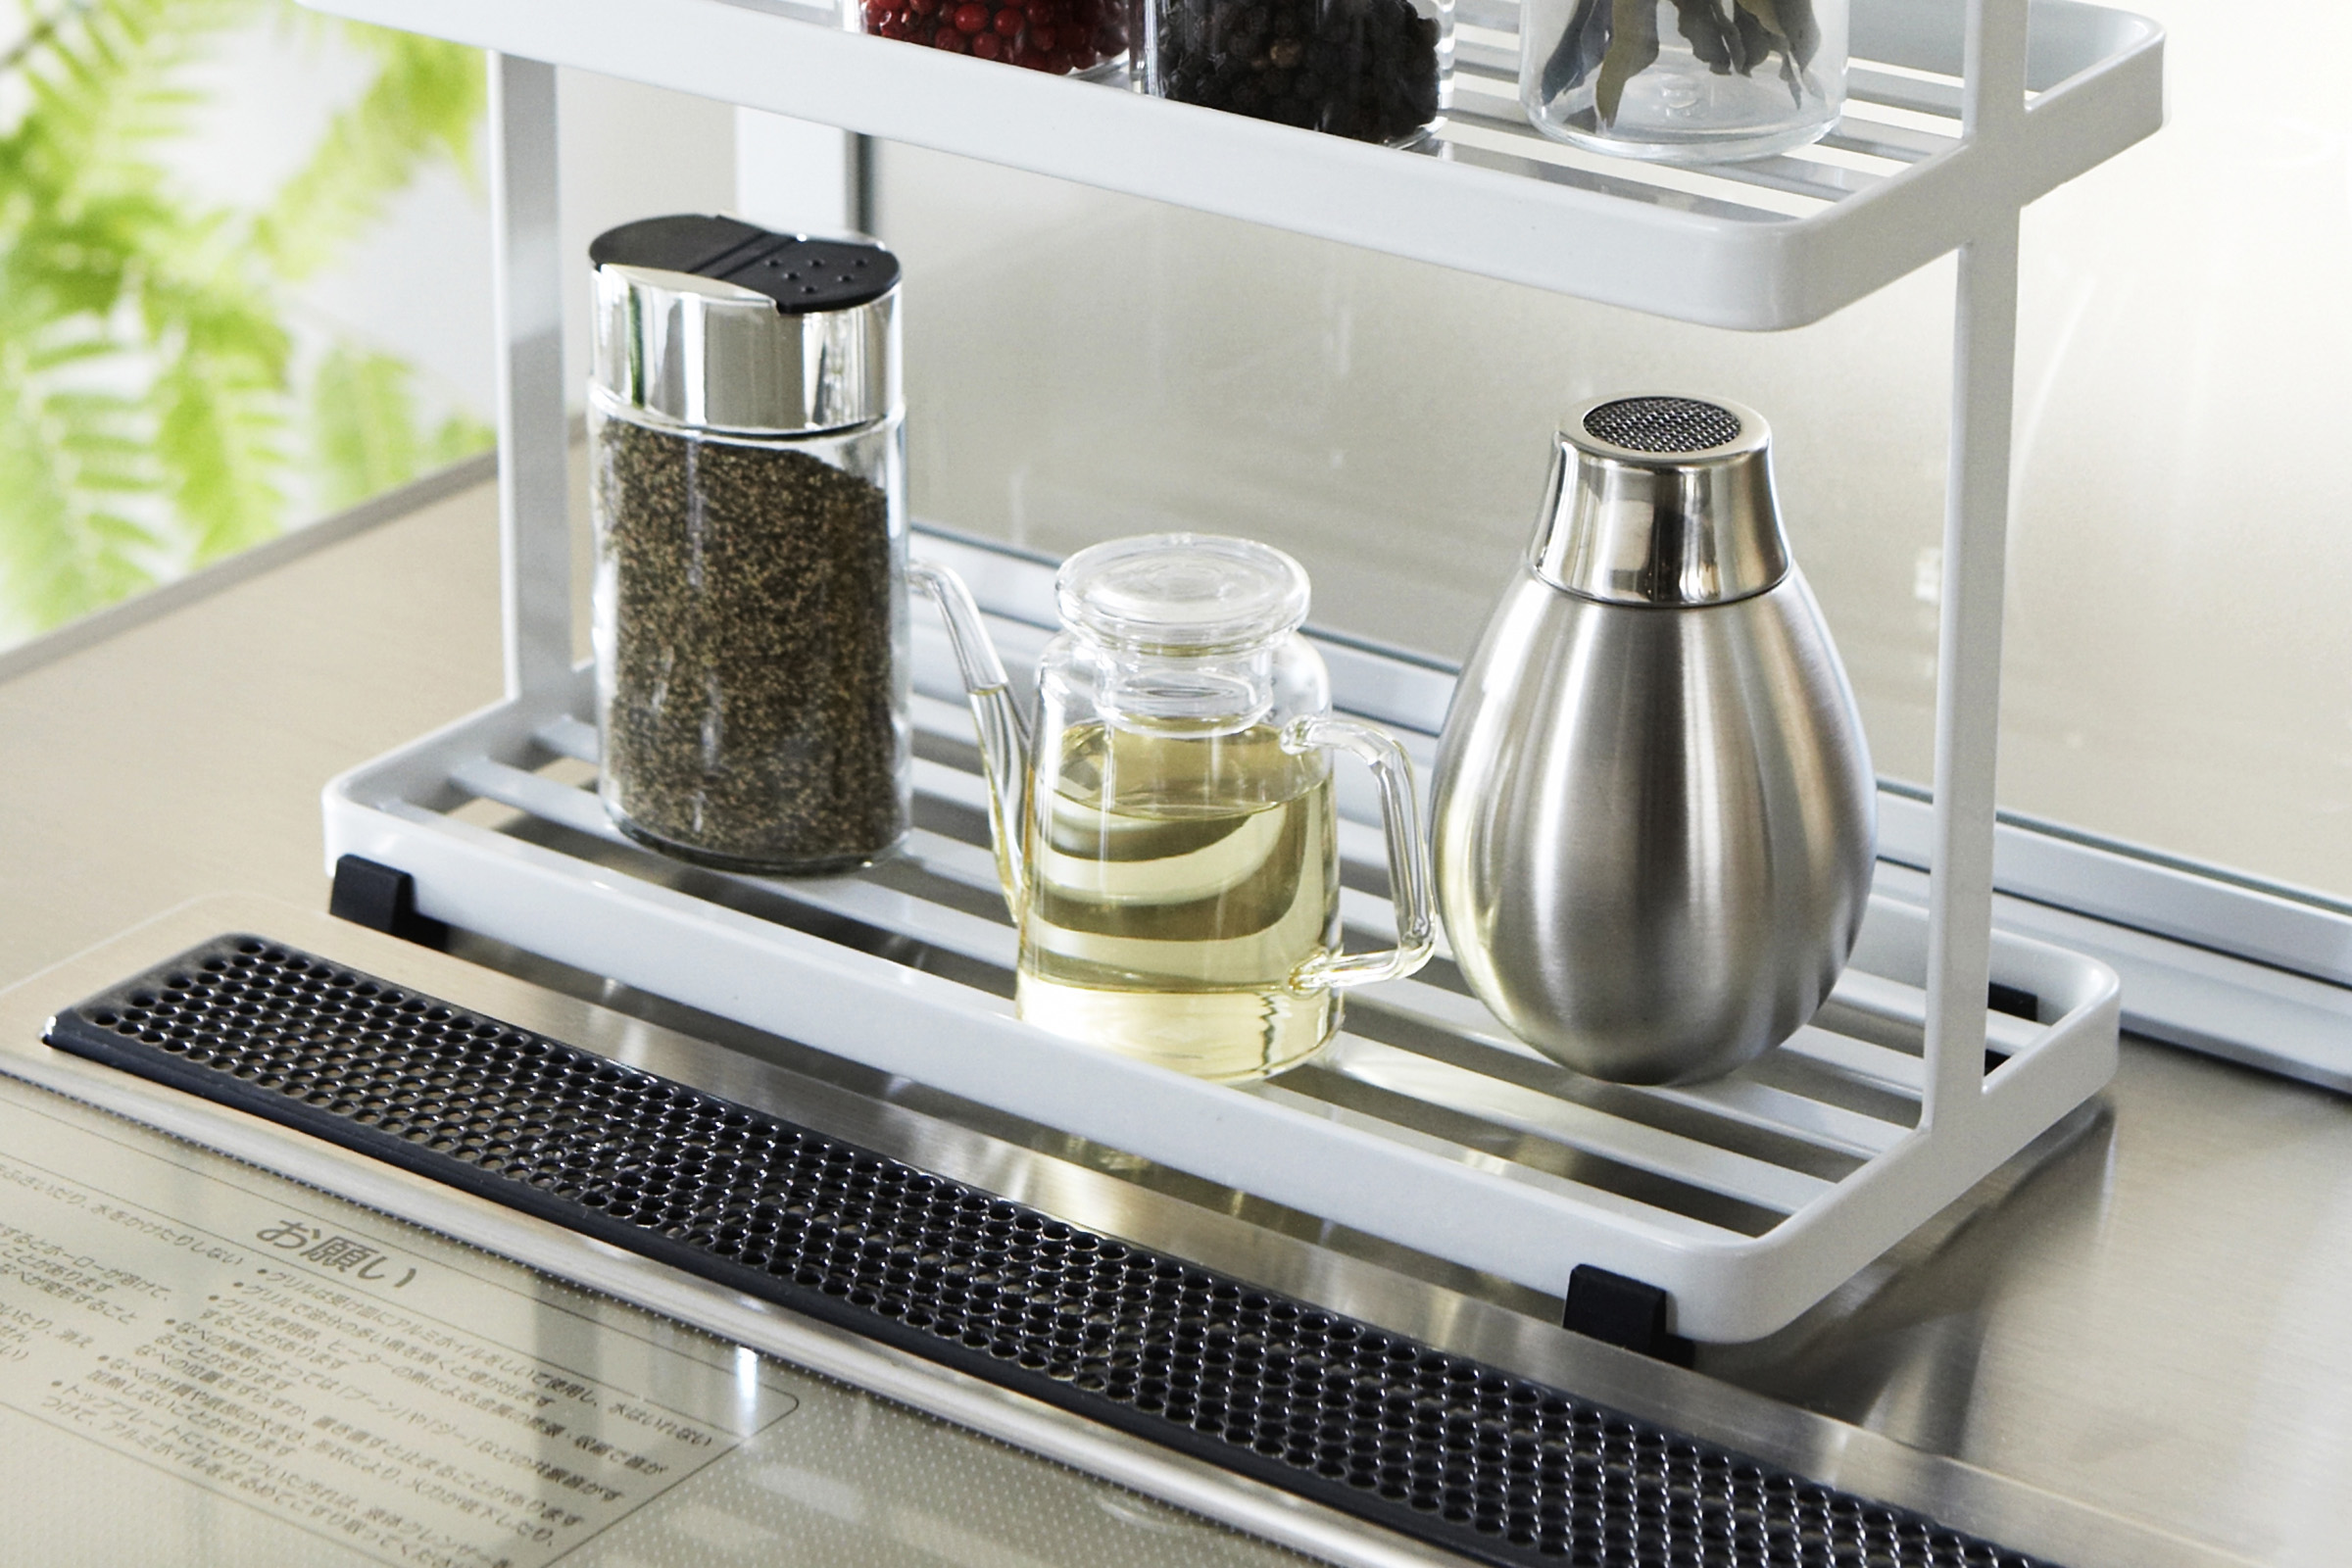 Zoomed in photo of Two tiered white rack with slatted shelves filled with spices on kitchen countertop.